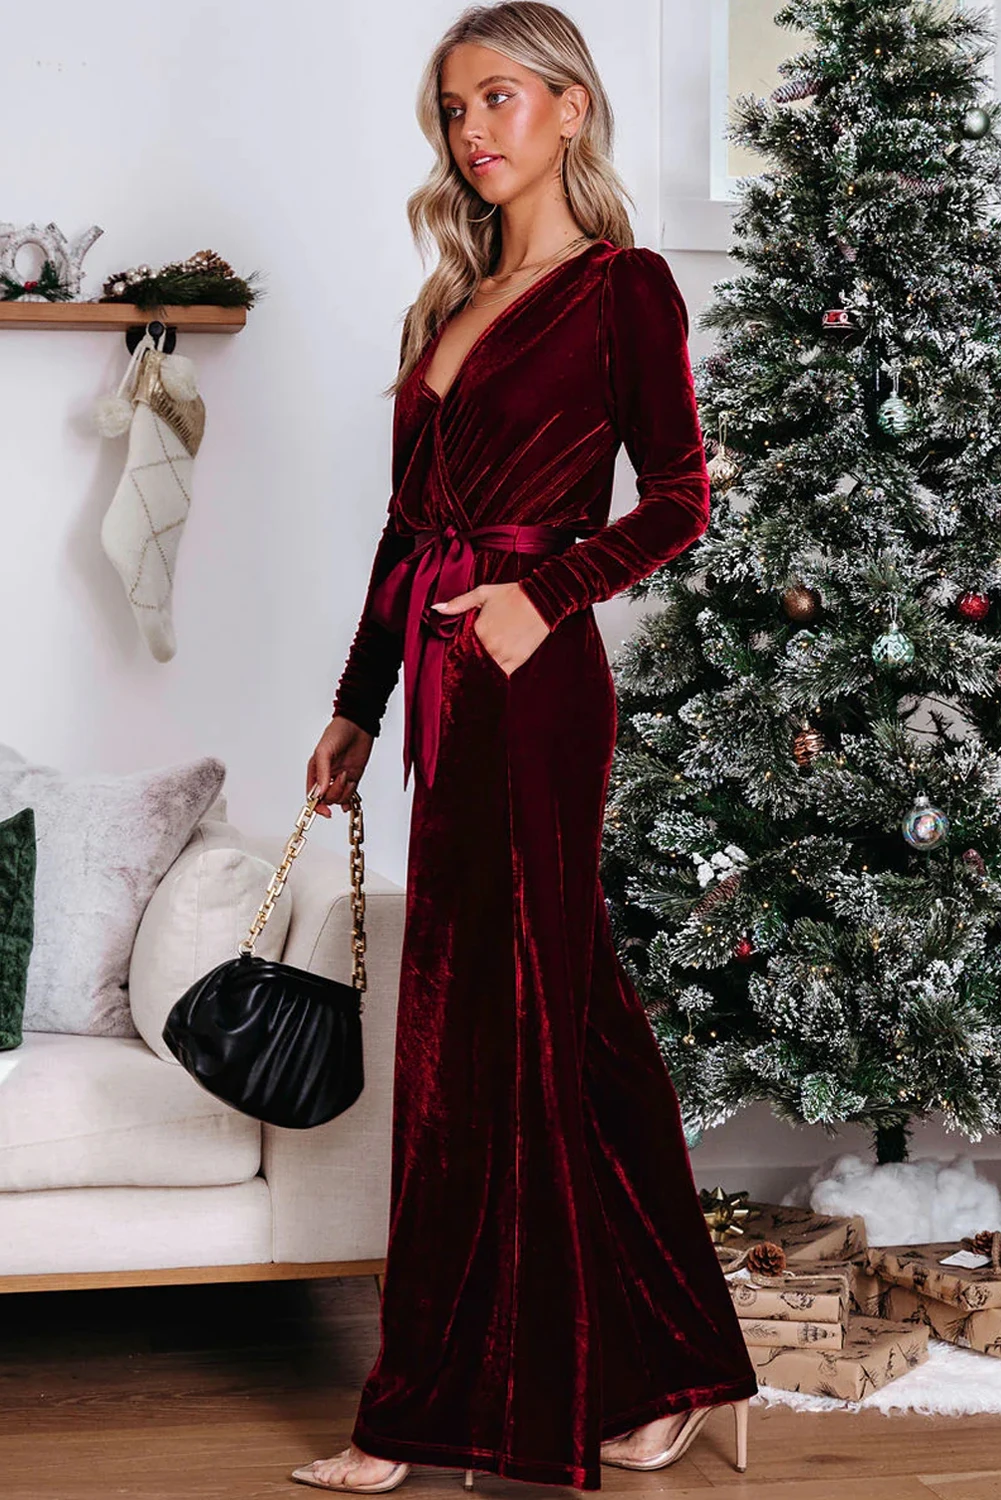 Dear-Lover Fiery Red Velvet Pocketed Cut Out Back Long Sleeve Flare Wide Leg Sexy Elegant Women's Chic Jumpsuit For Wedding